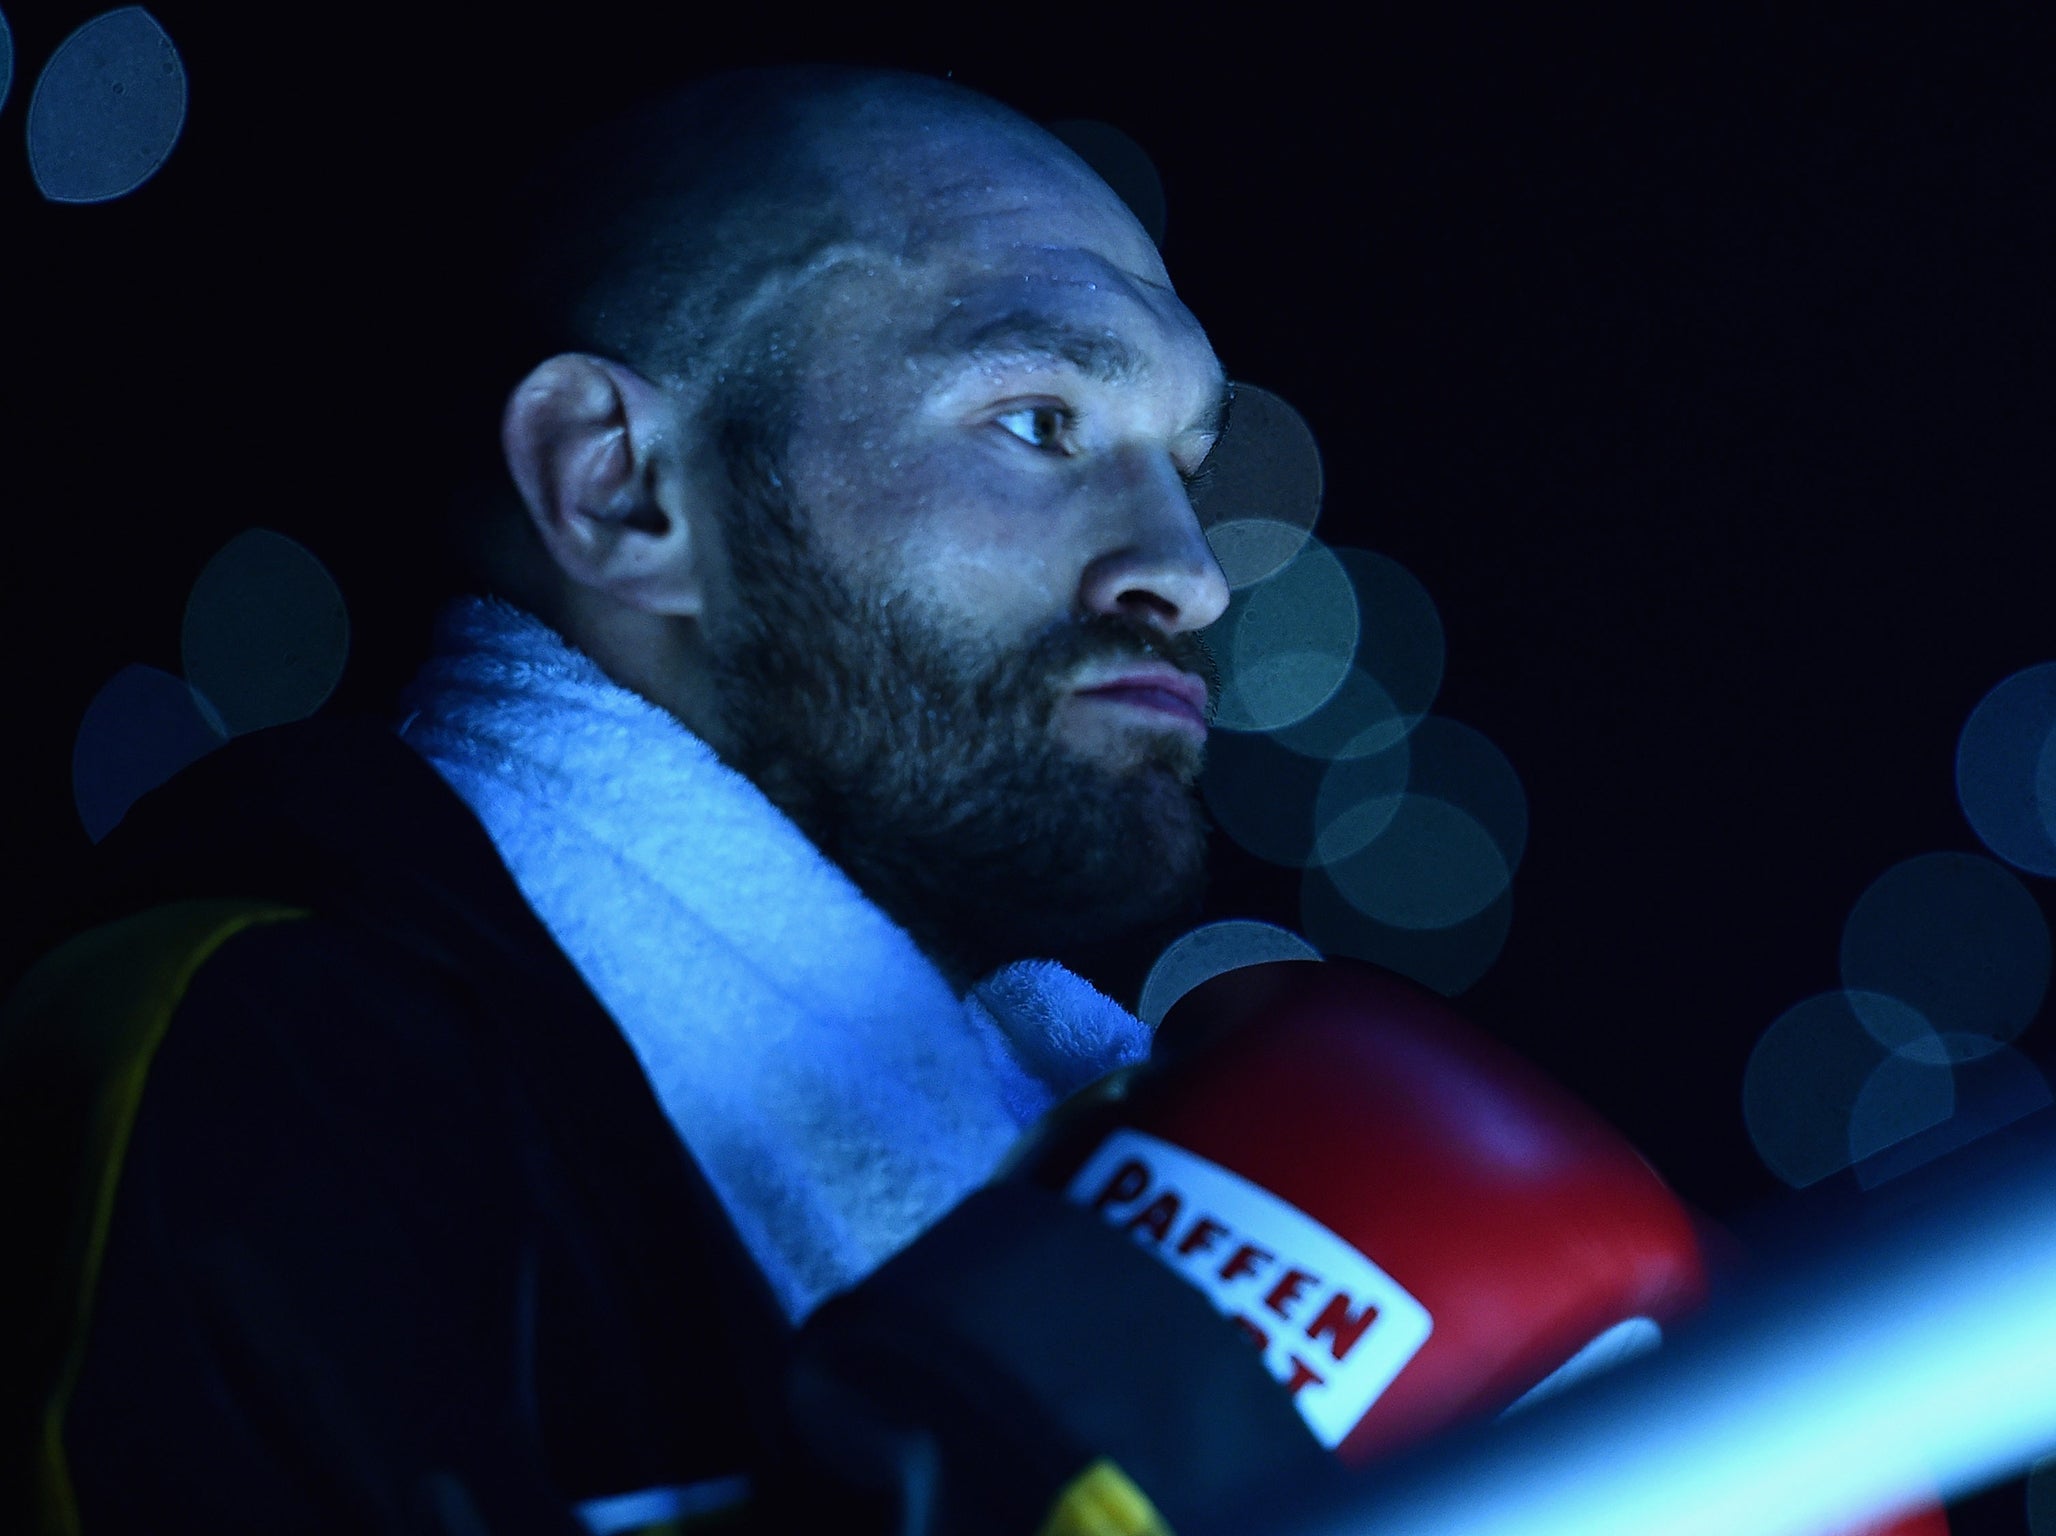 Fury will make his long-awaited return to the ring in 2018